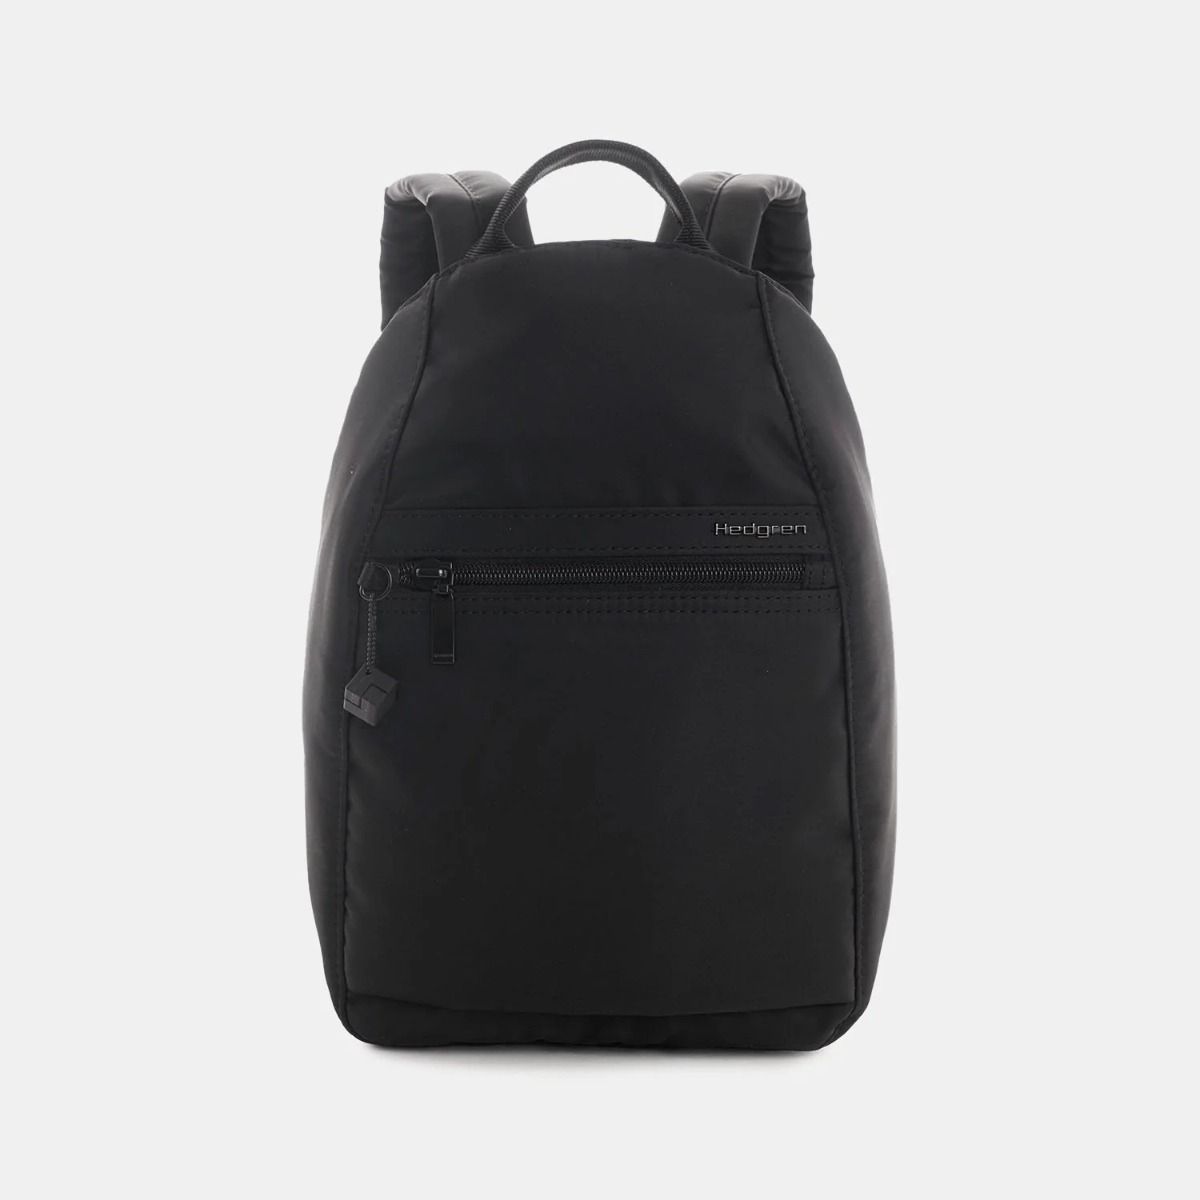 Hedgren - INNER CITY  VOGUE SMALL BACKPACK SMALL RFID